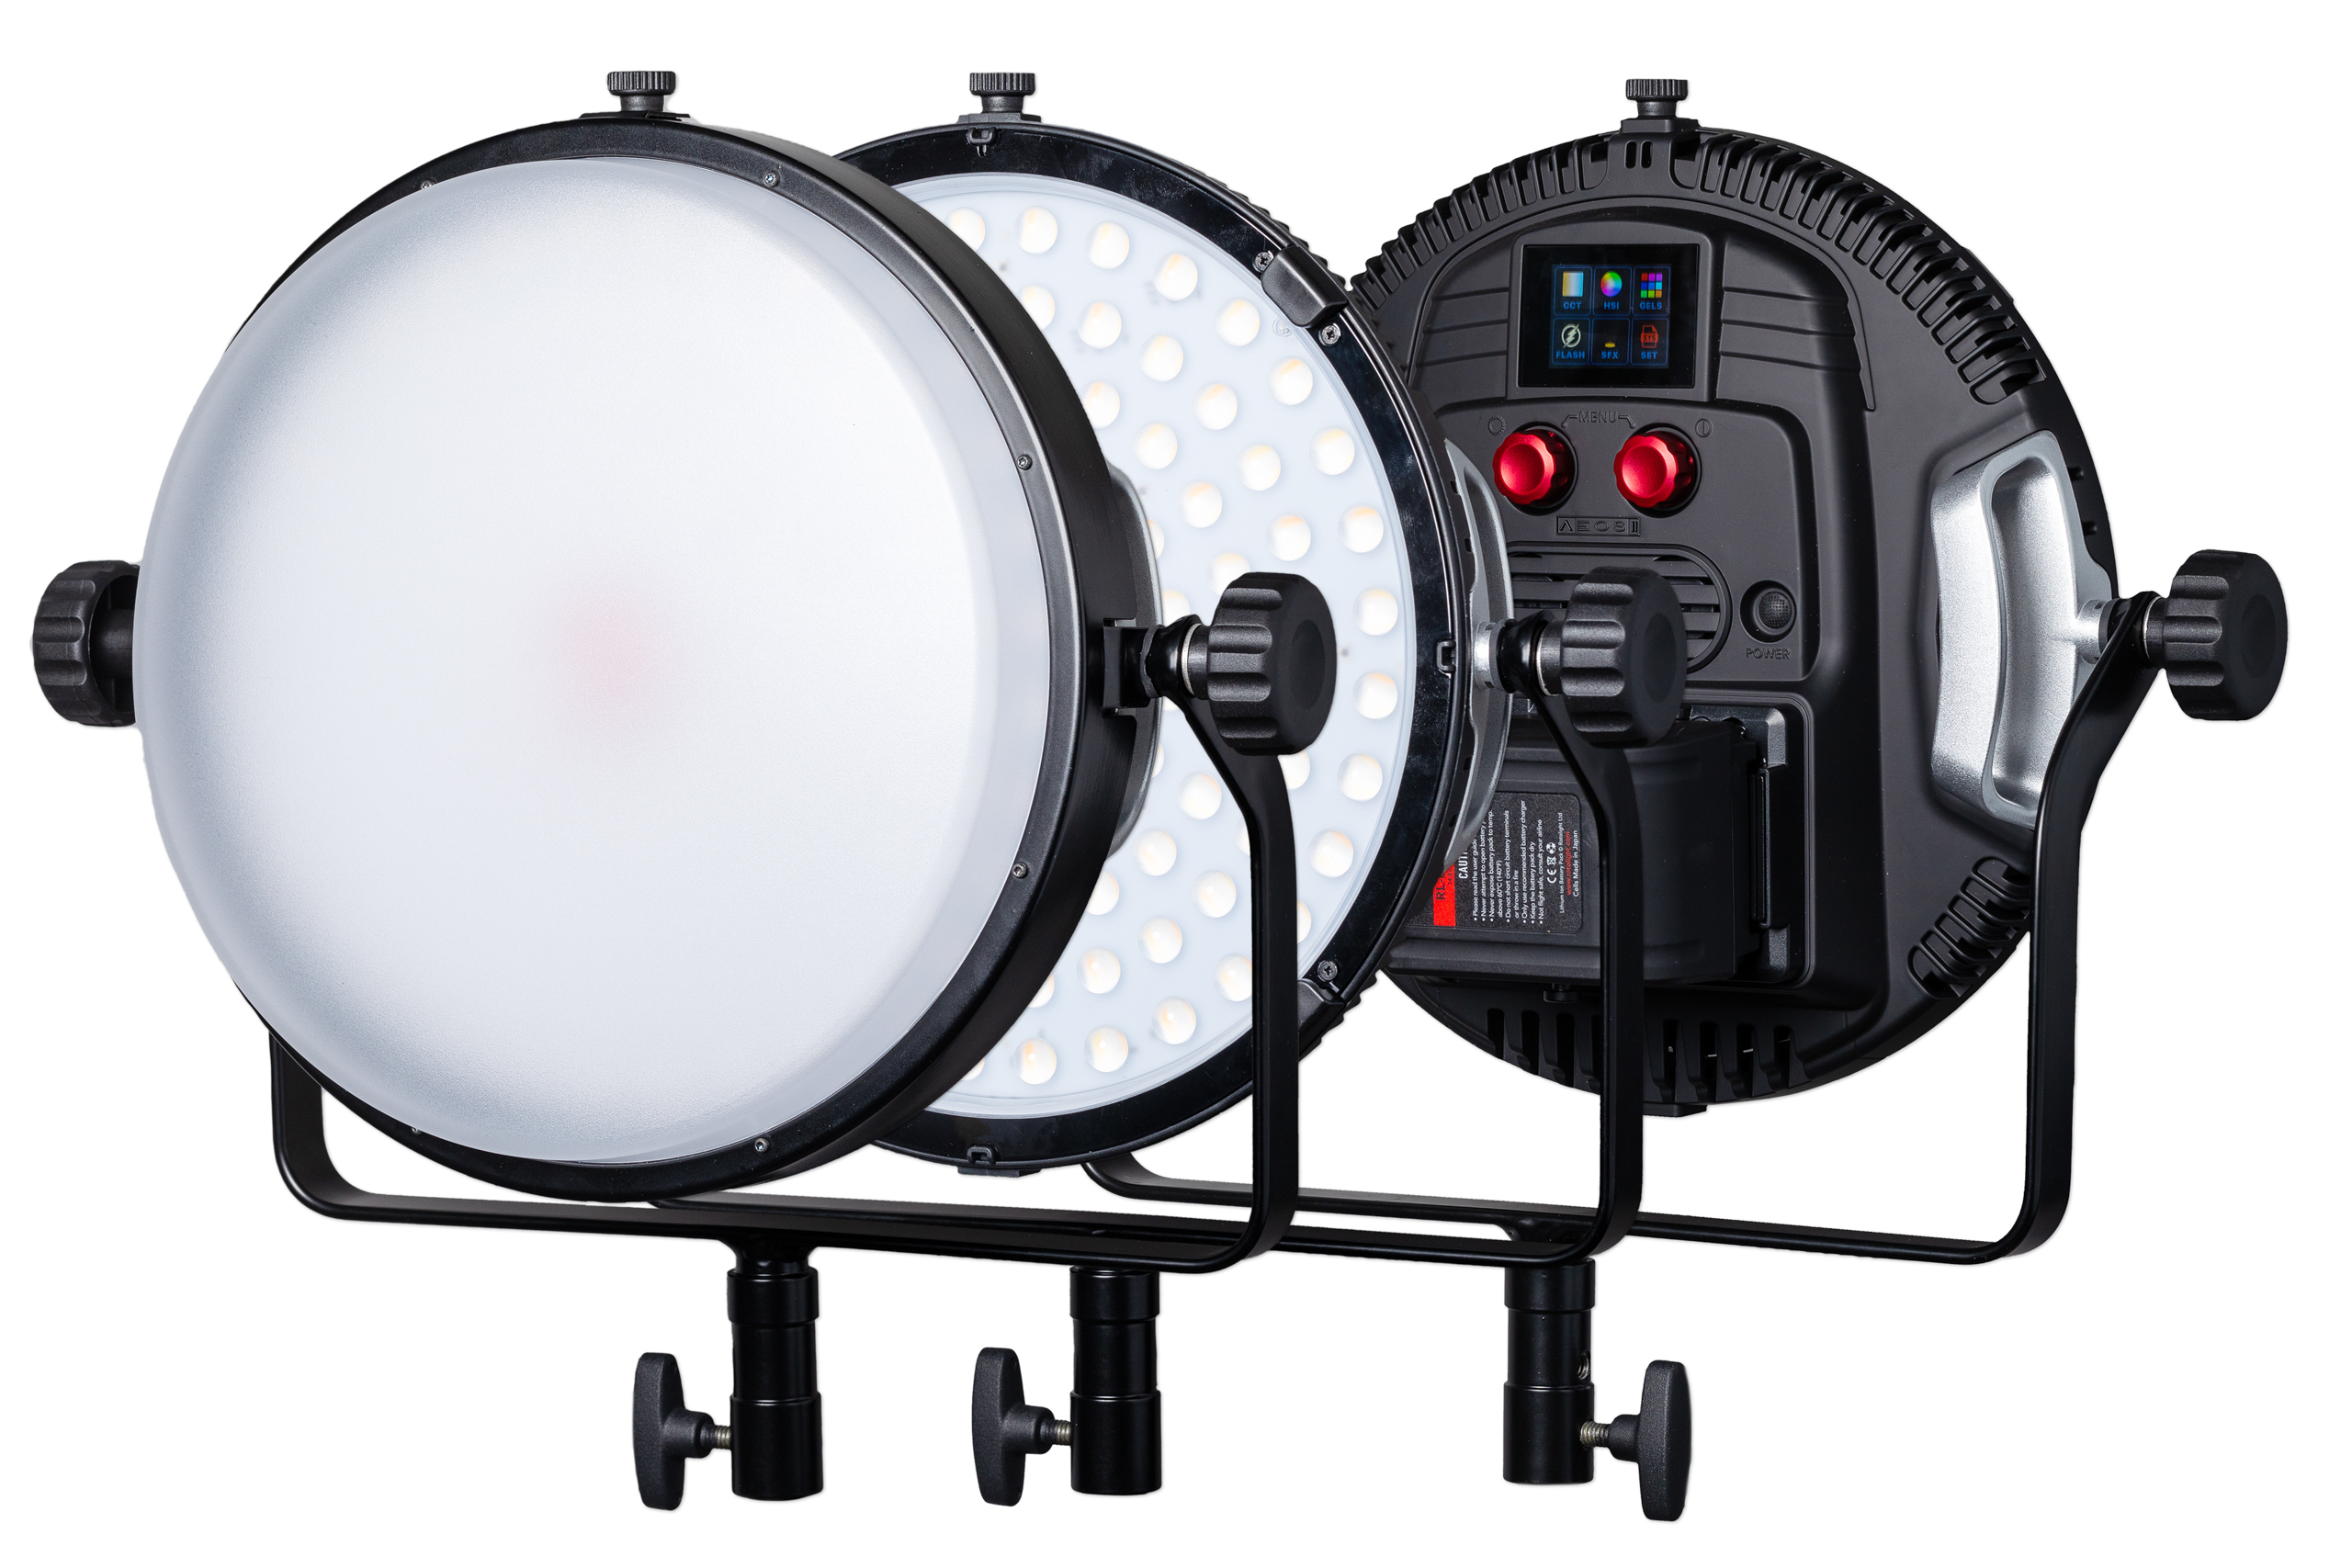 The AEOS 2 is the larger light, shown with and without the diffuser